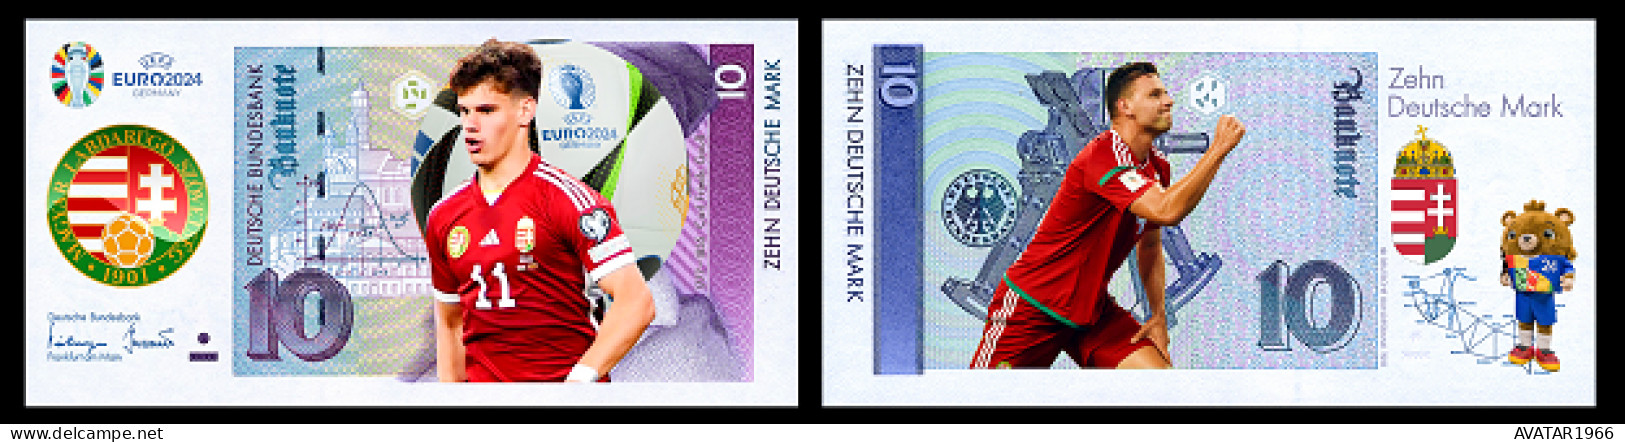 UEFA European Football Championship 2024 Qualified Country Hungary 8 Pieces Germany Fantasy Paper Money - [15] Commemoratives & Special Issues